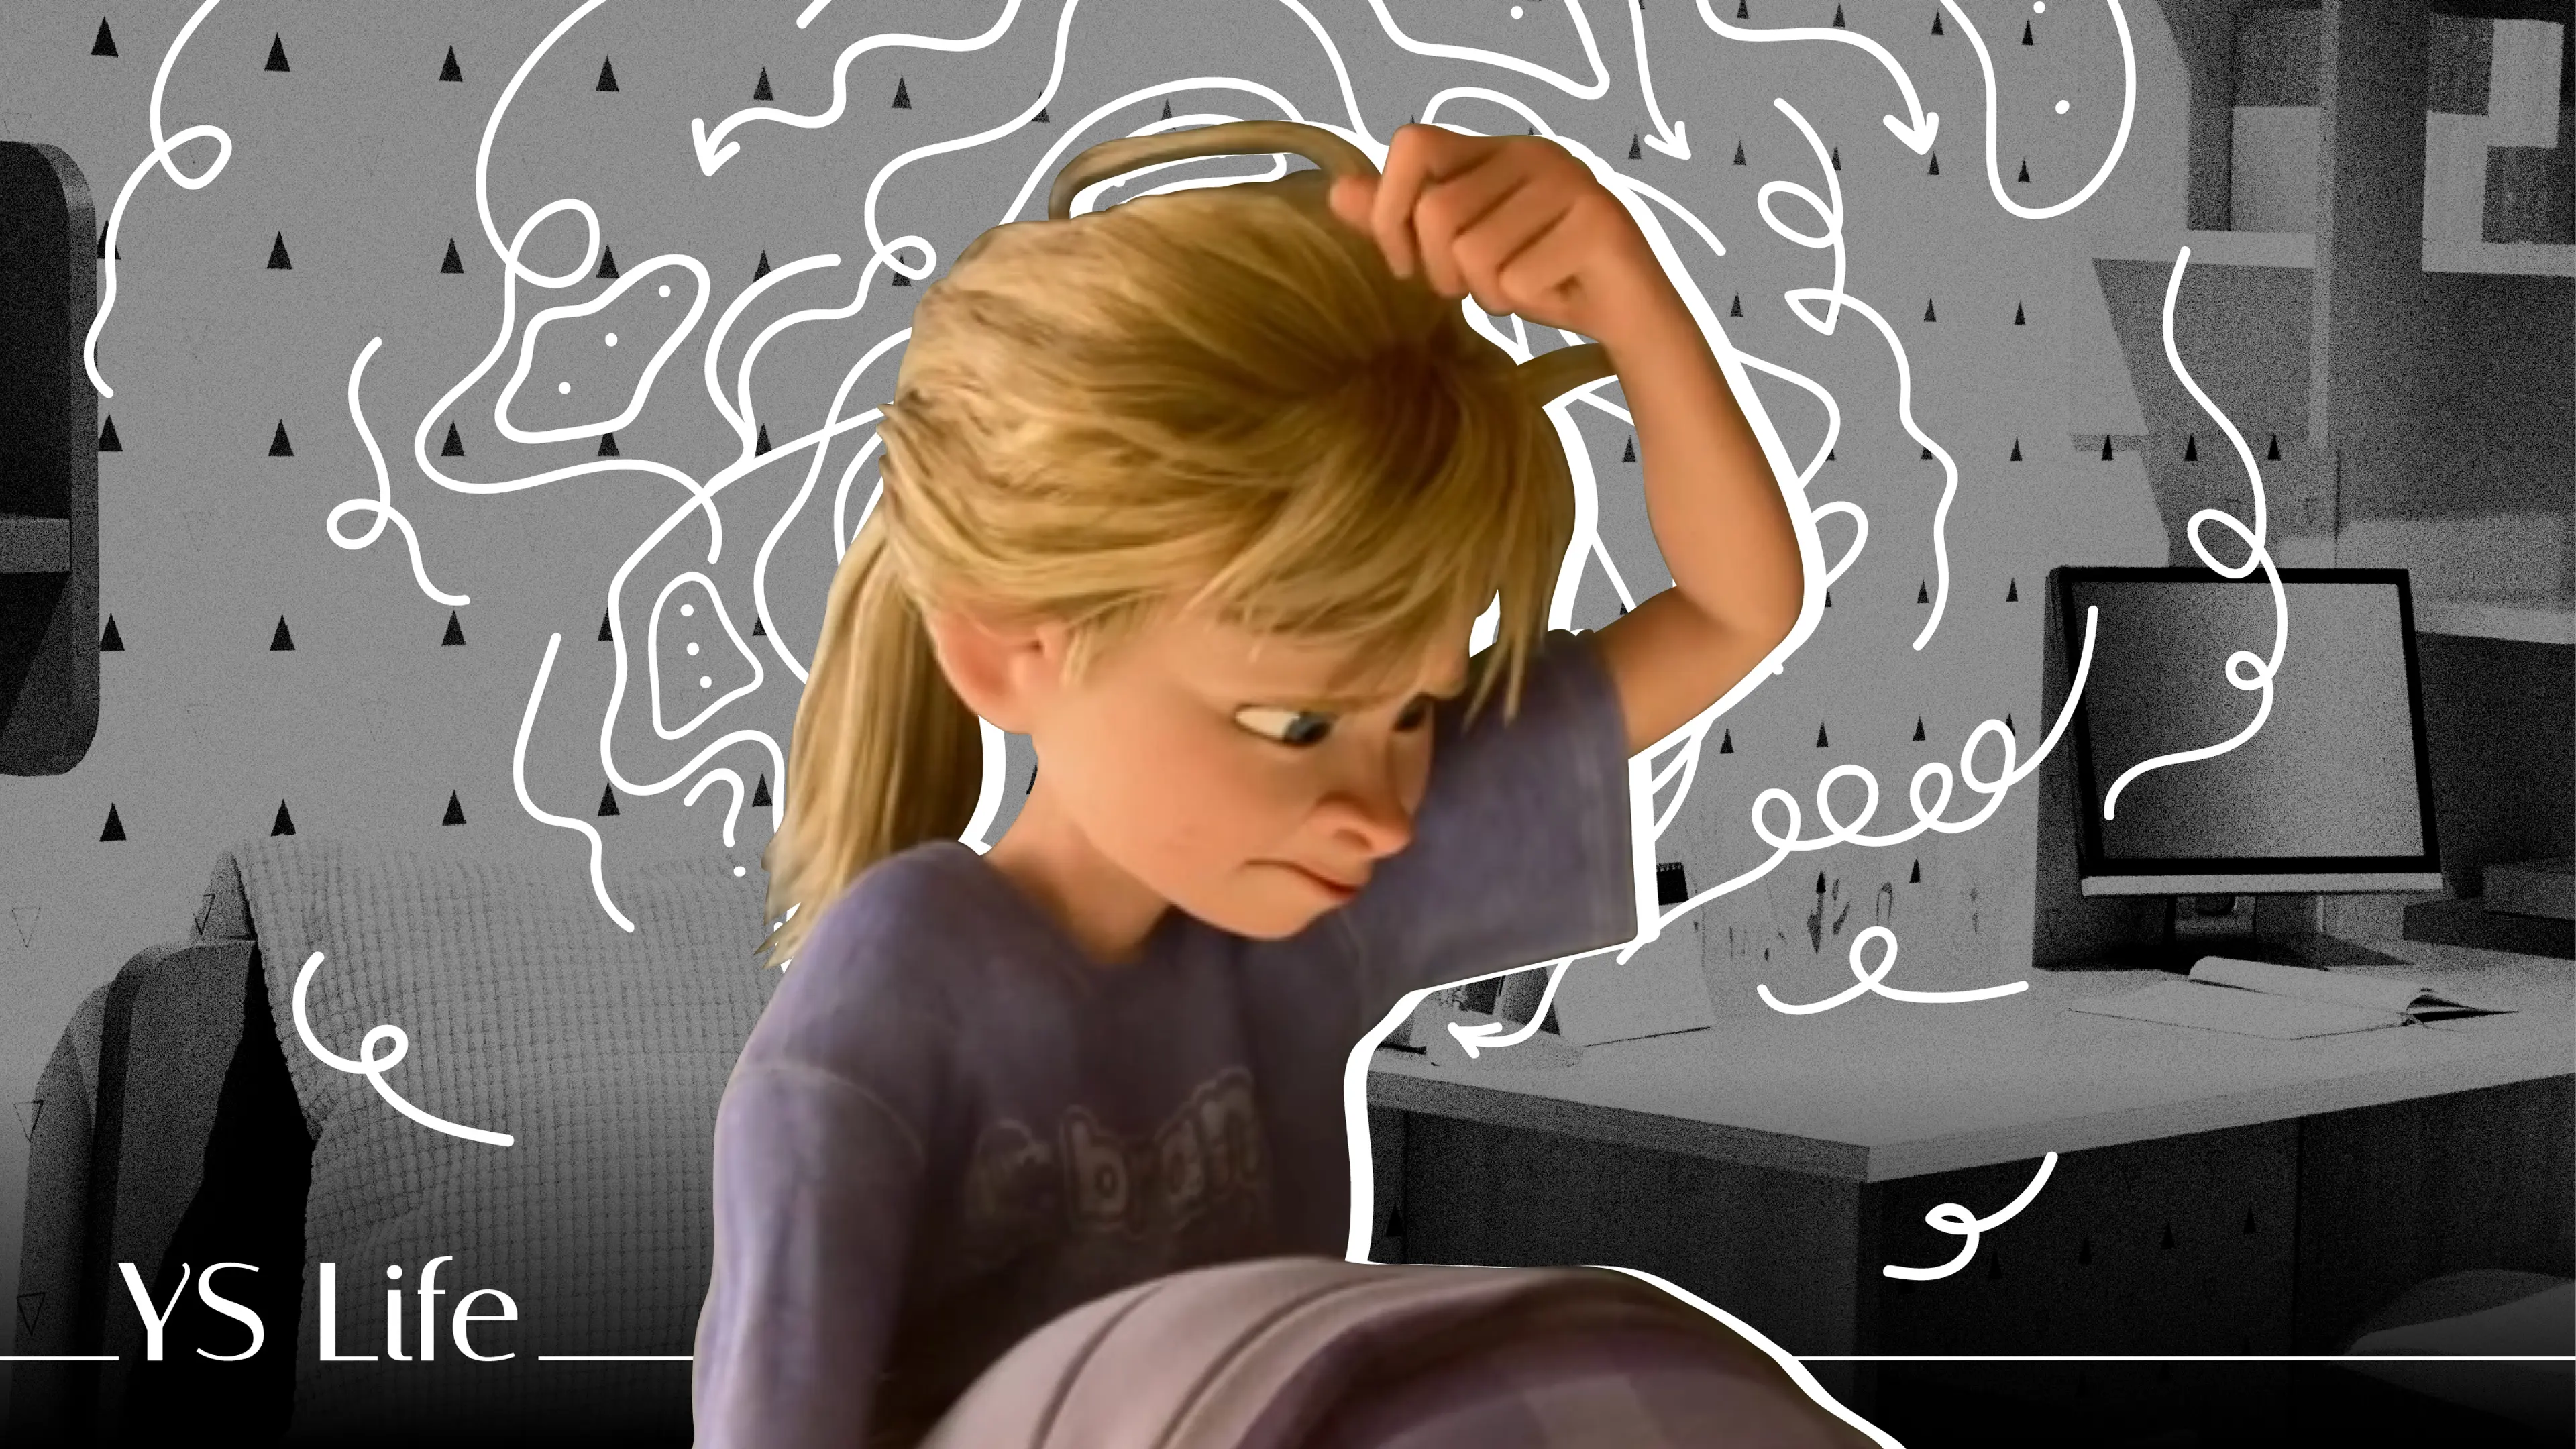 Inside Out 2 turns the spotlight on anxiety as a dominant emotion in teens 